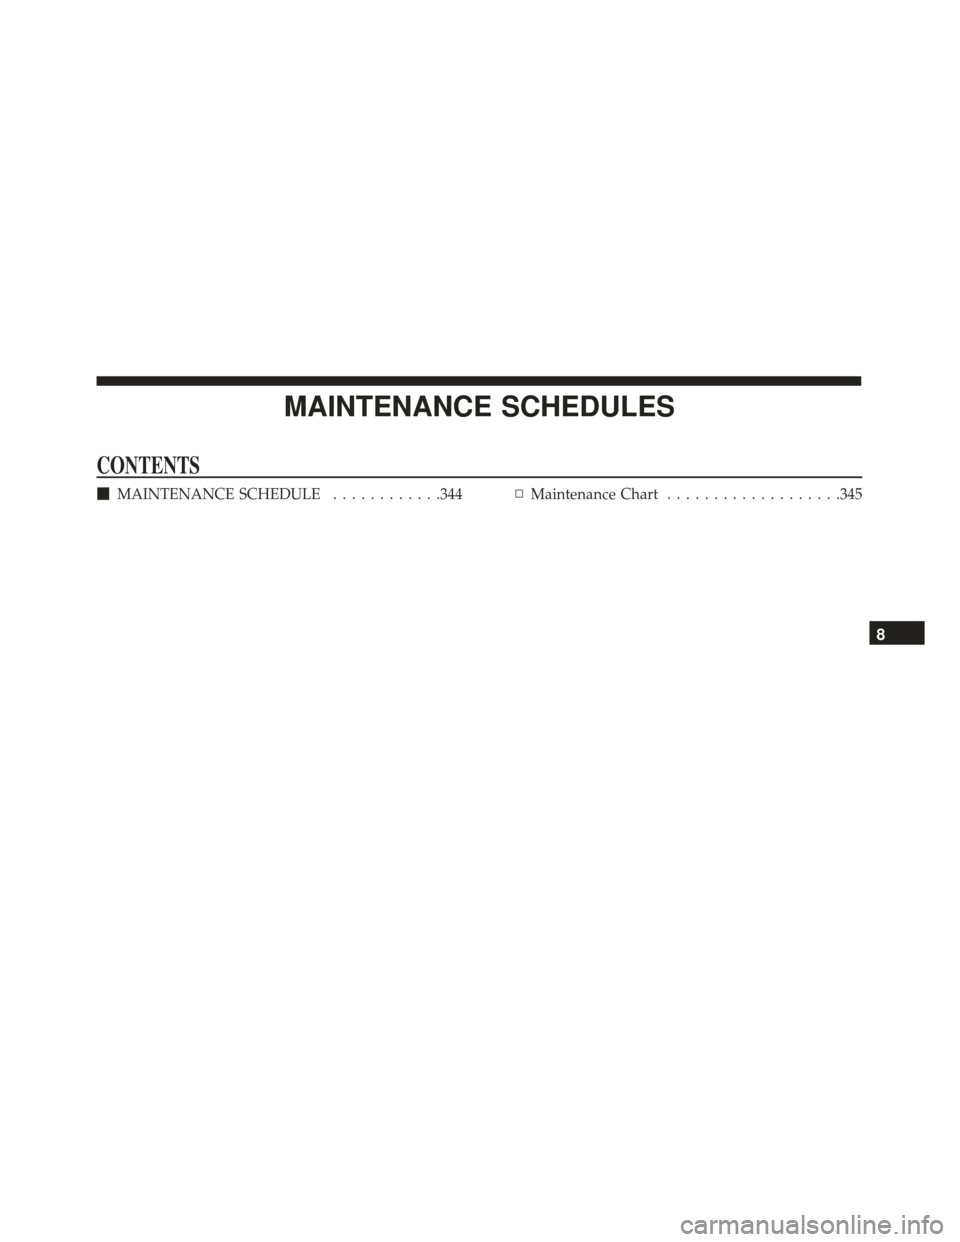 FIAT 500L 2017 2.G Owners Manual MAINTENANCE SCHEDULES
CONTENTS
MAINTENANCE SCHEDULE ............344▫Maintenance Chart ...................345
8 